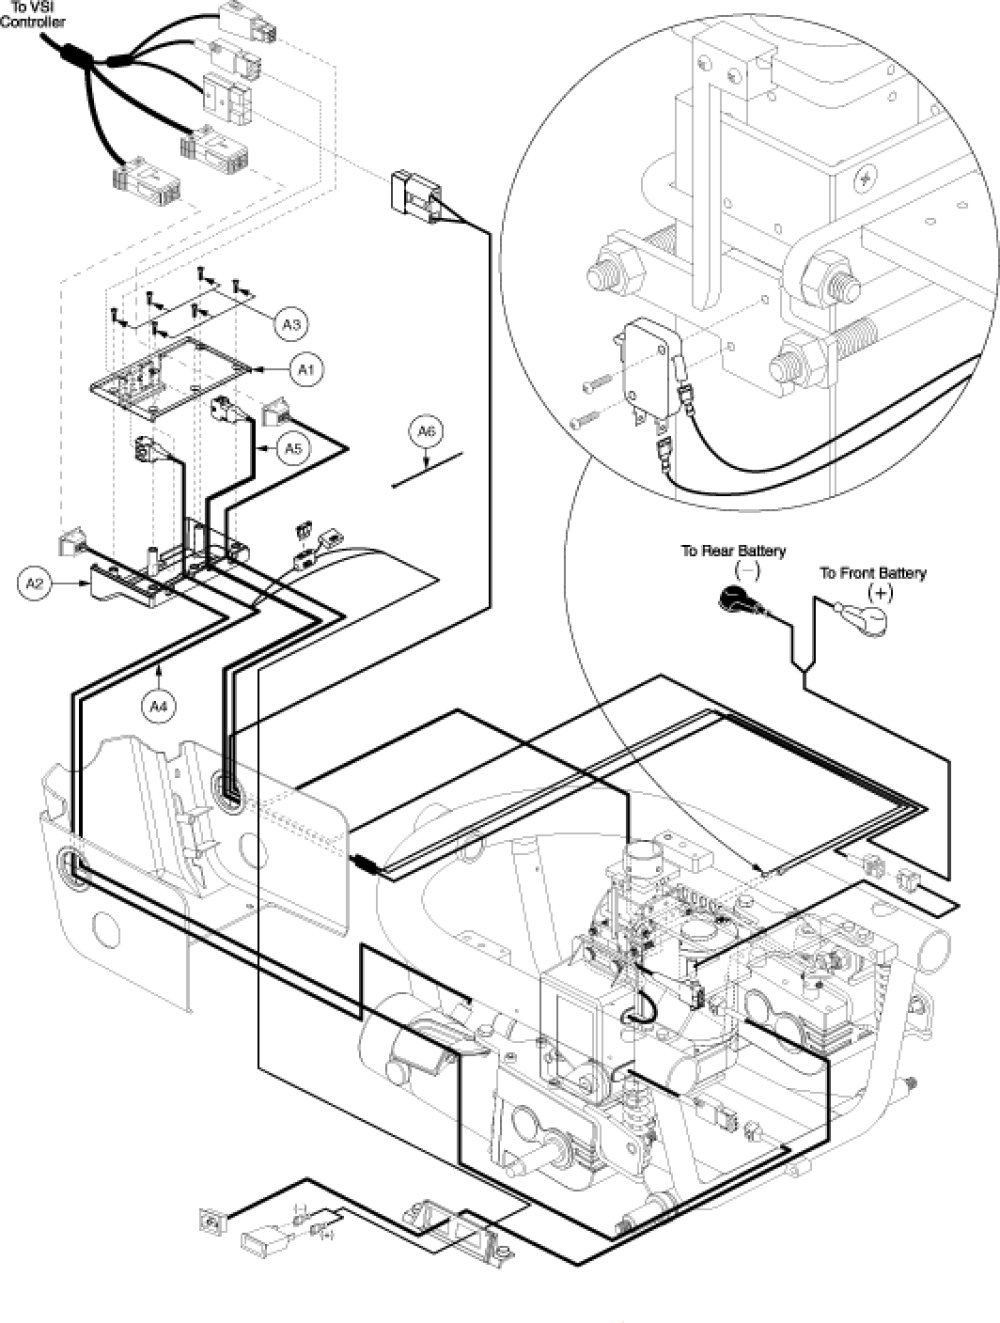 Electronics Assembly - Vsi, Power Seat, Onboard parts diagram